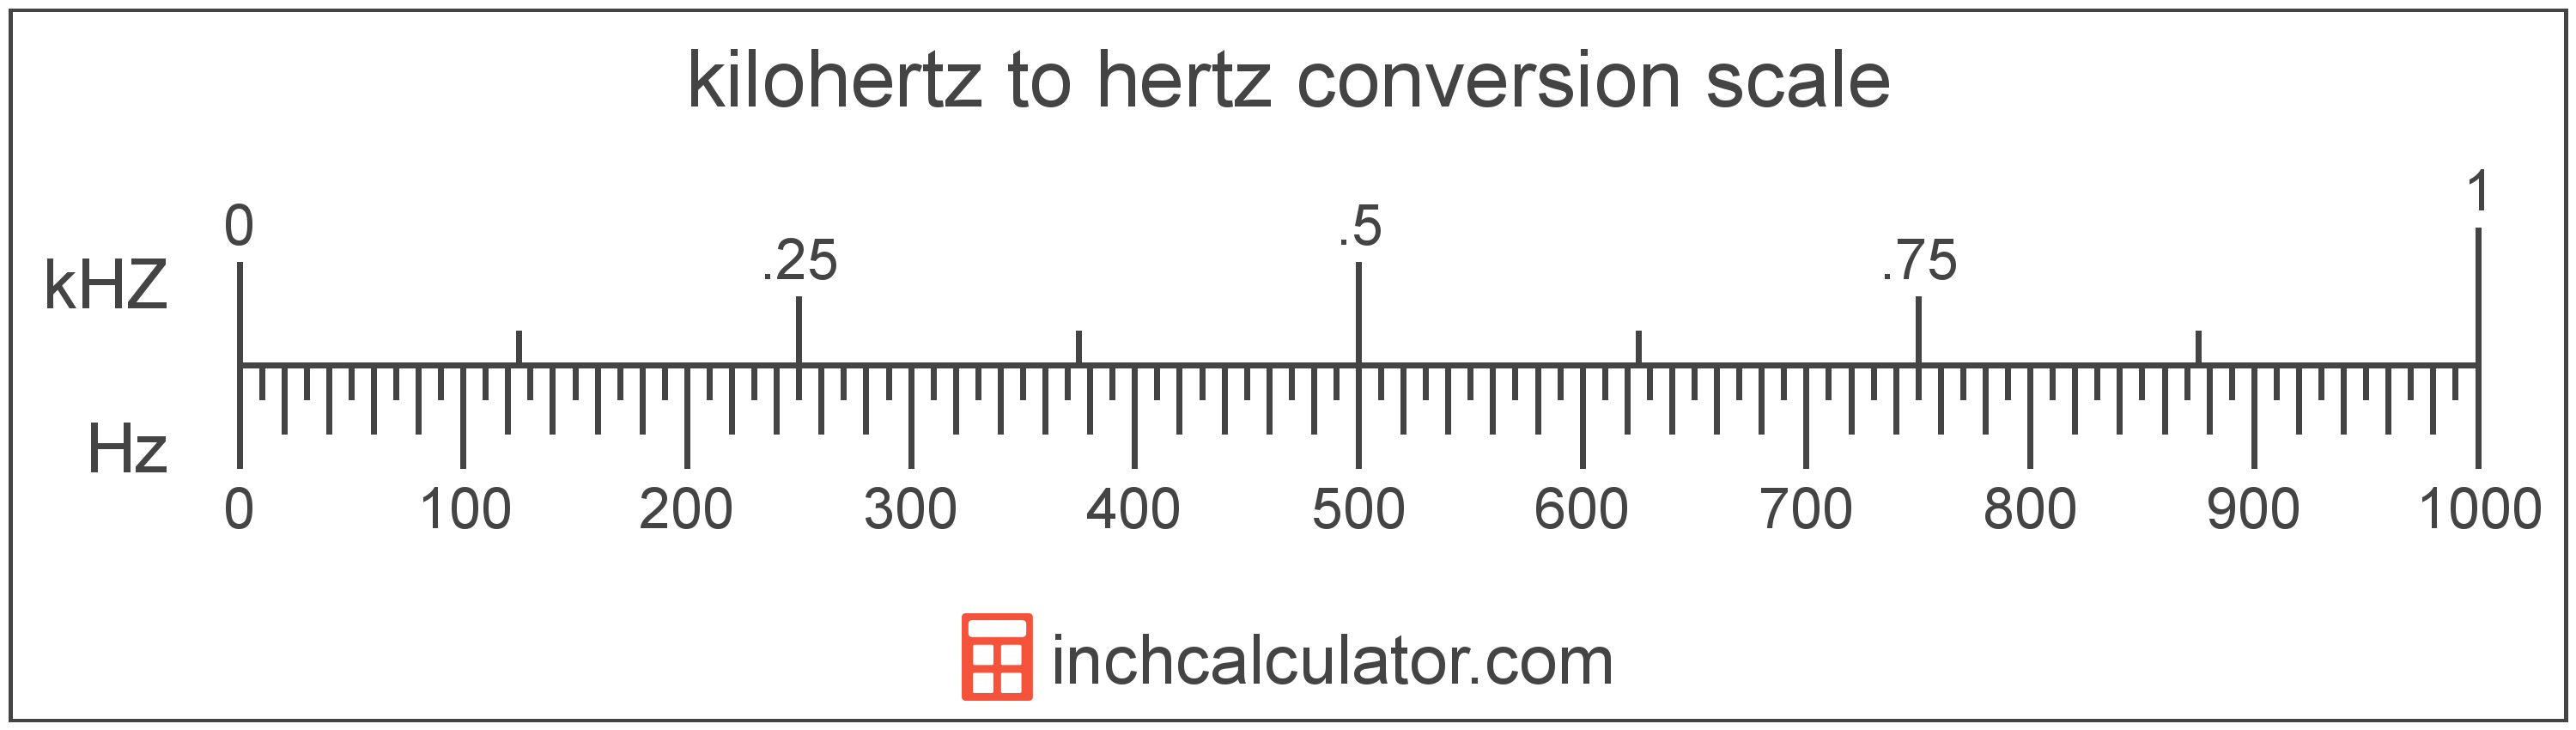 conversion scale showing kilohertz and equivalent hertz frequency values